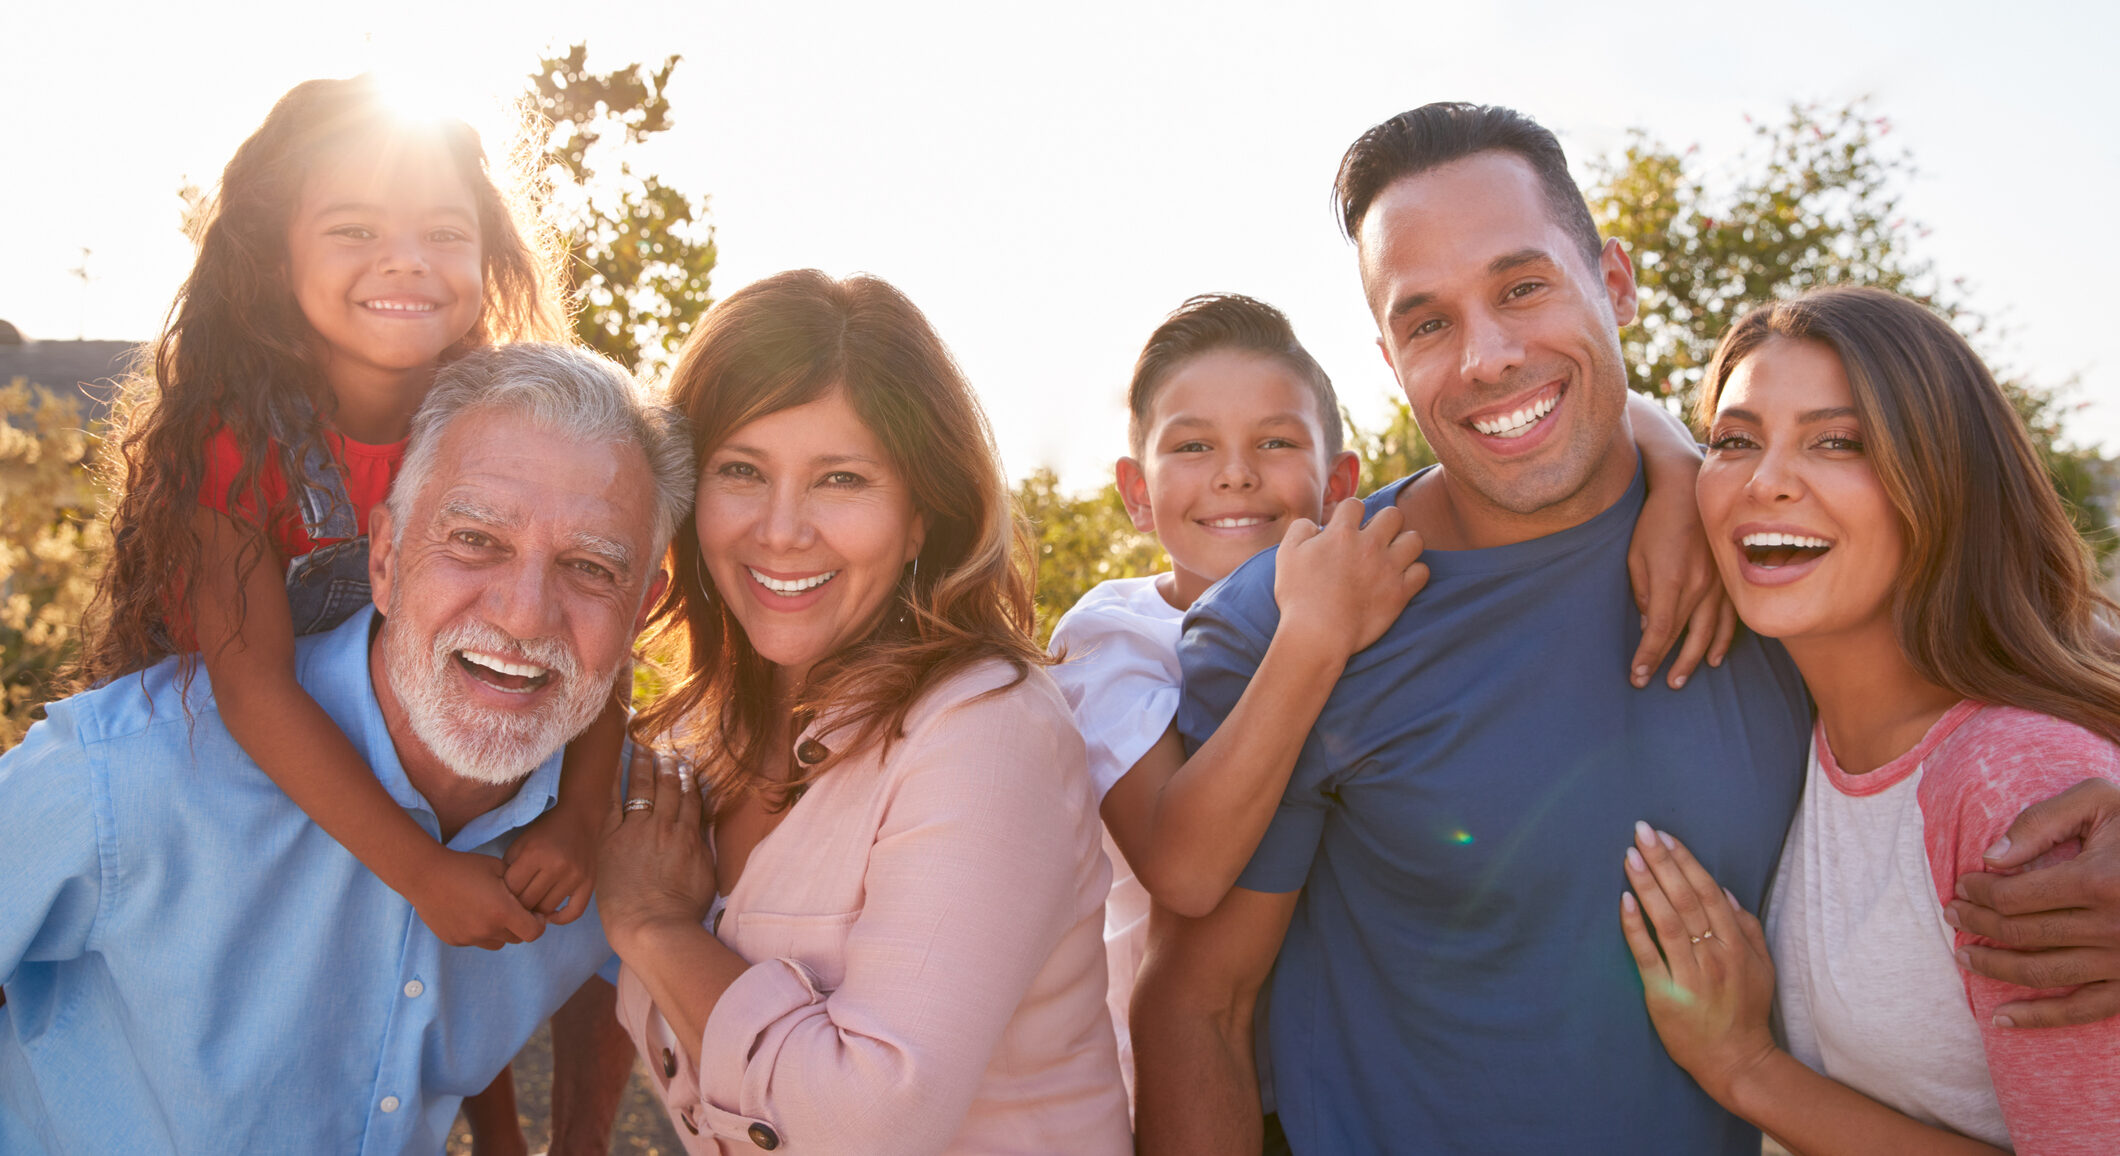 Insuring Your Family, To Give You Peace of Mind